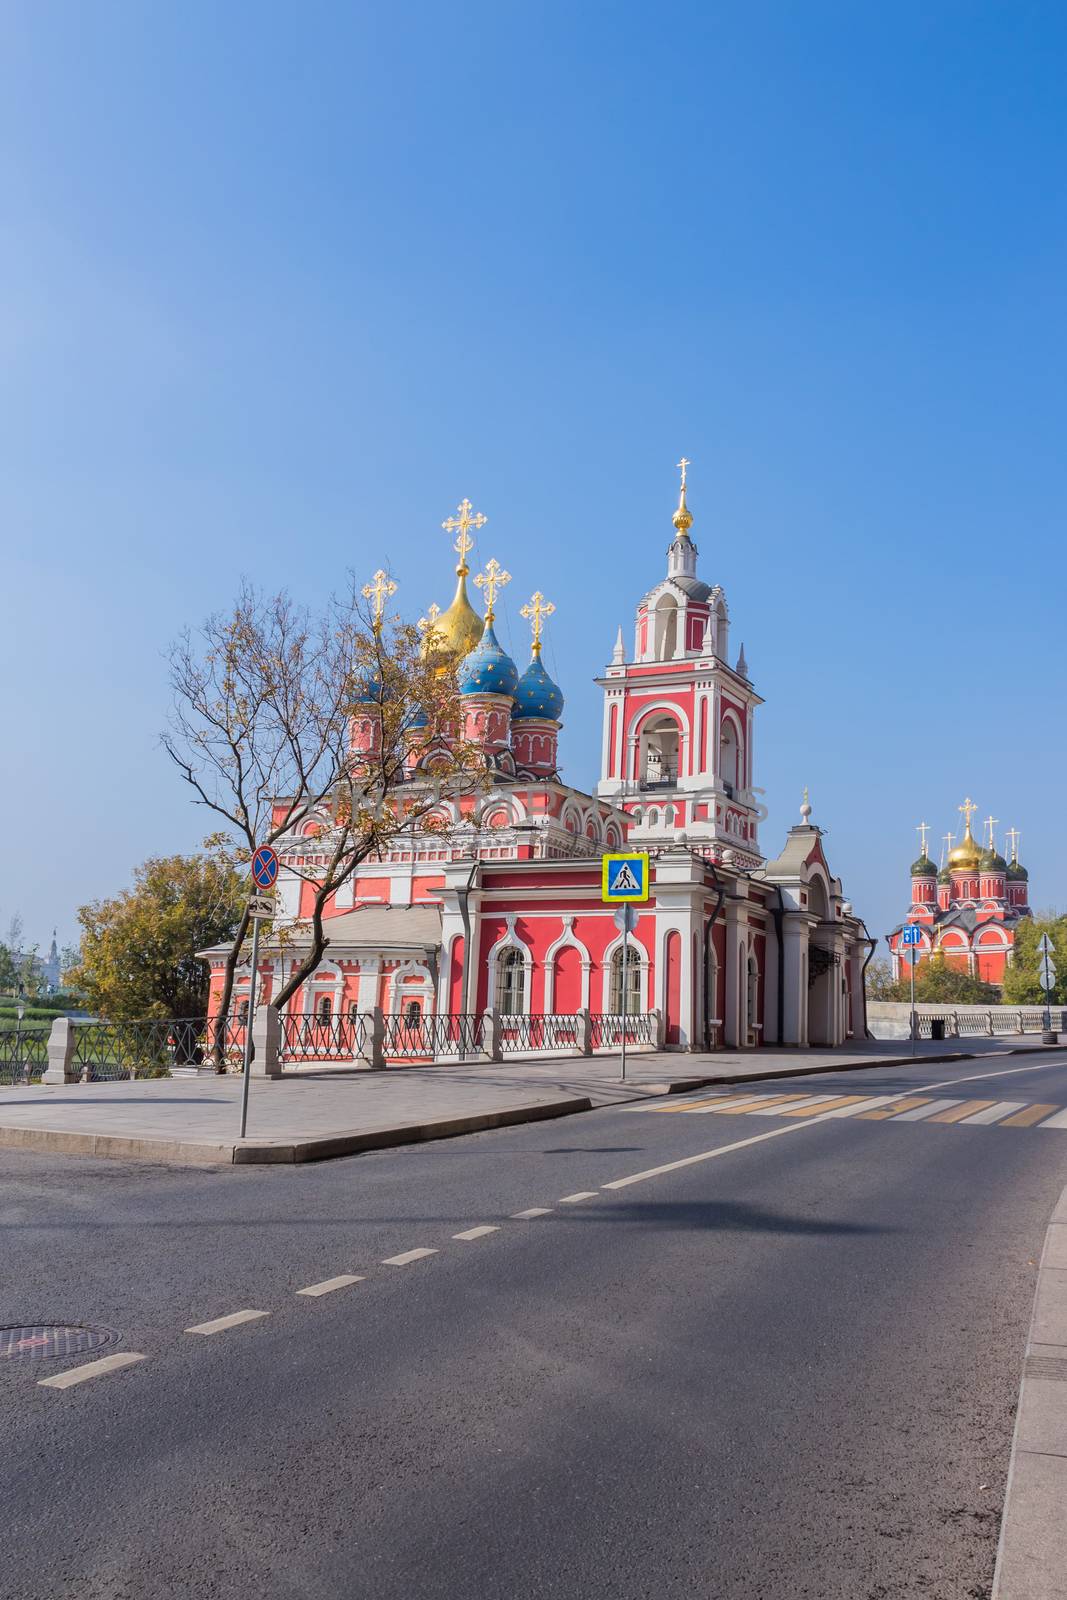 Church of St George (the Protection of the Blessed Virgin) on the Pskov mountain on Varvarka street in center of Moscow city